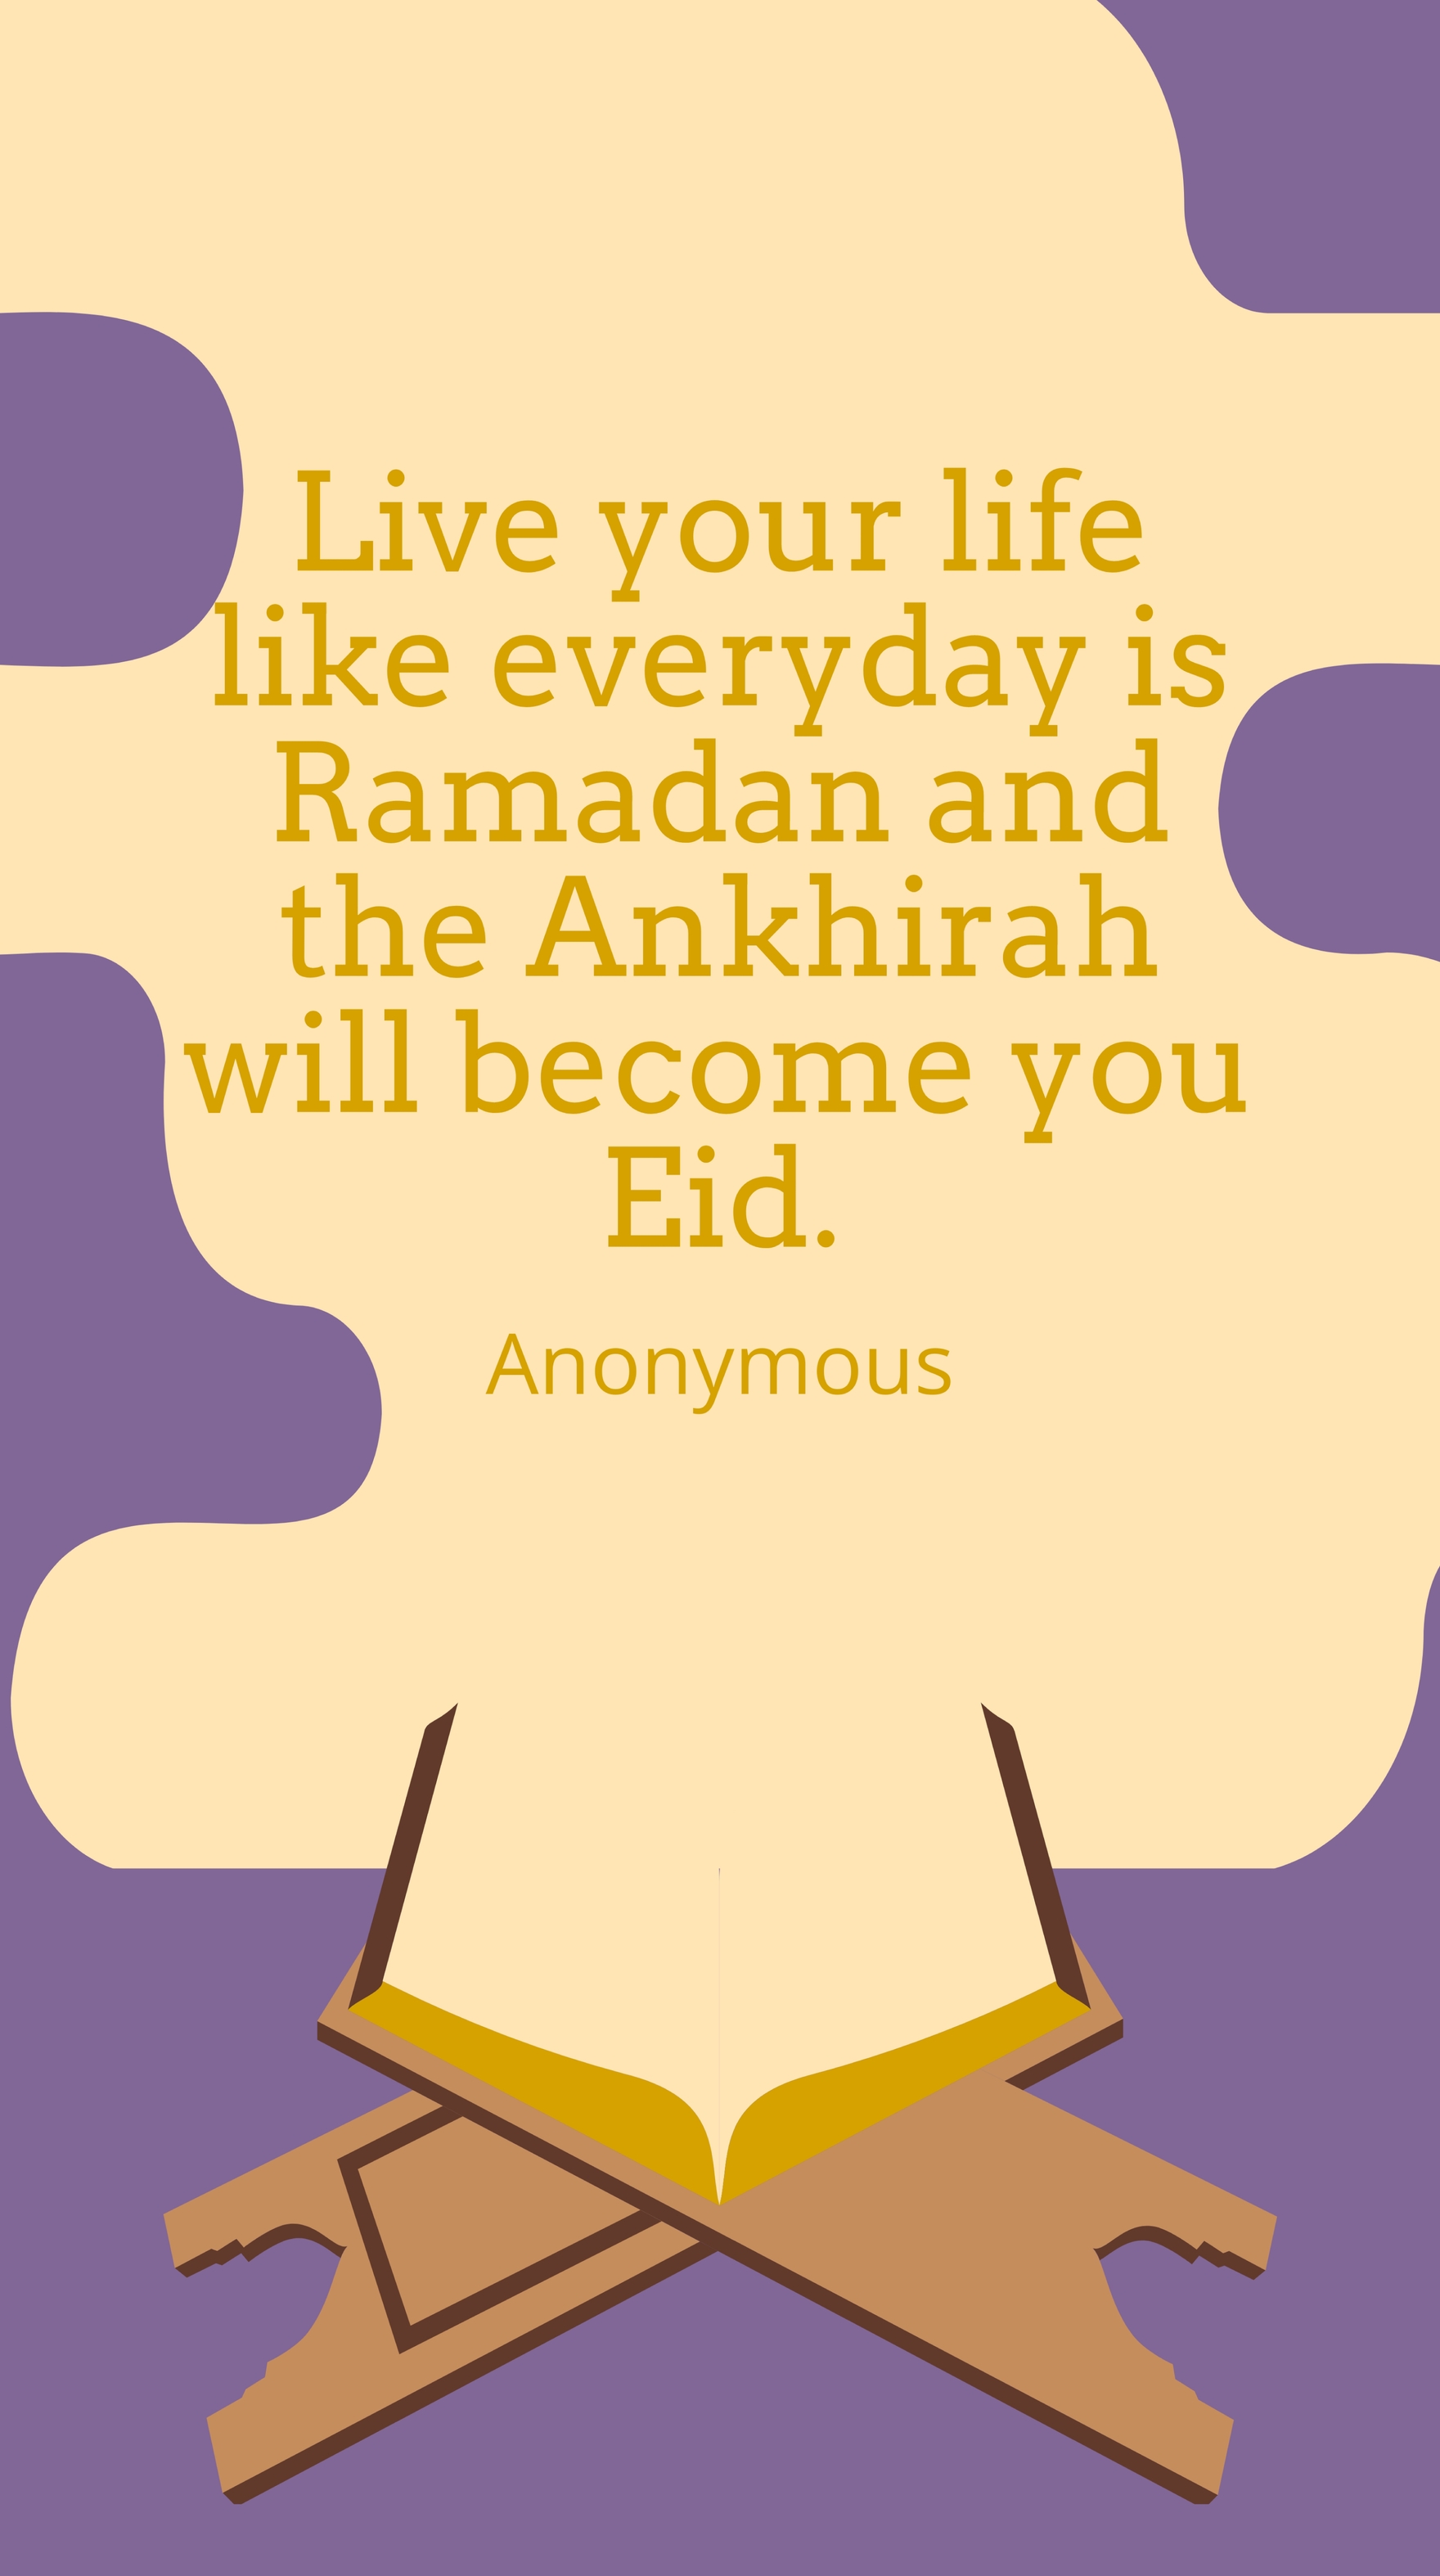 Free Anonymous - Live your life like everyday is Ramadan and the Ankhirah will become you Eid. in JPG